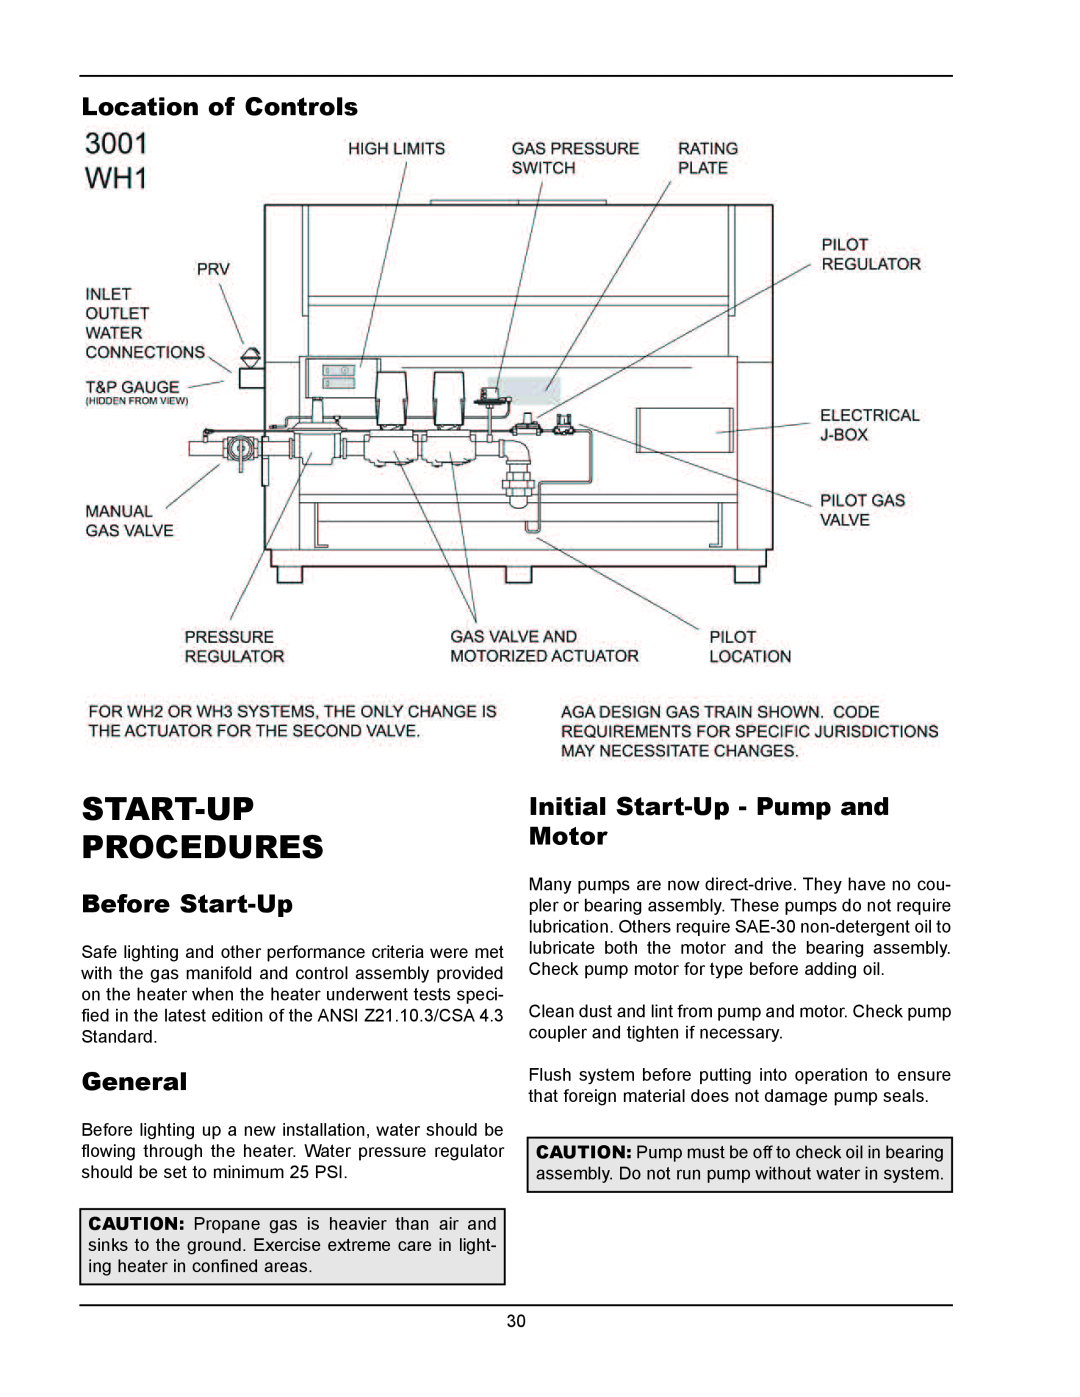 Raypak 1334001 Start-Up Procedures, before Start-Up, General, Initial Start-Up- Pump and Motor, Location of Controls 